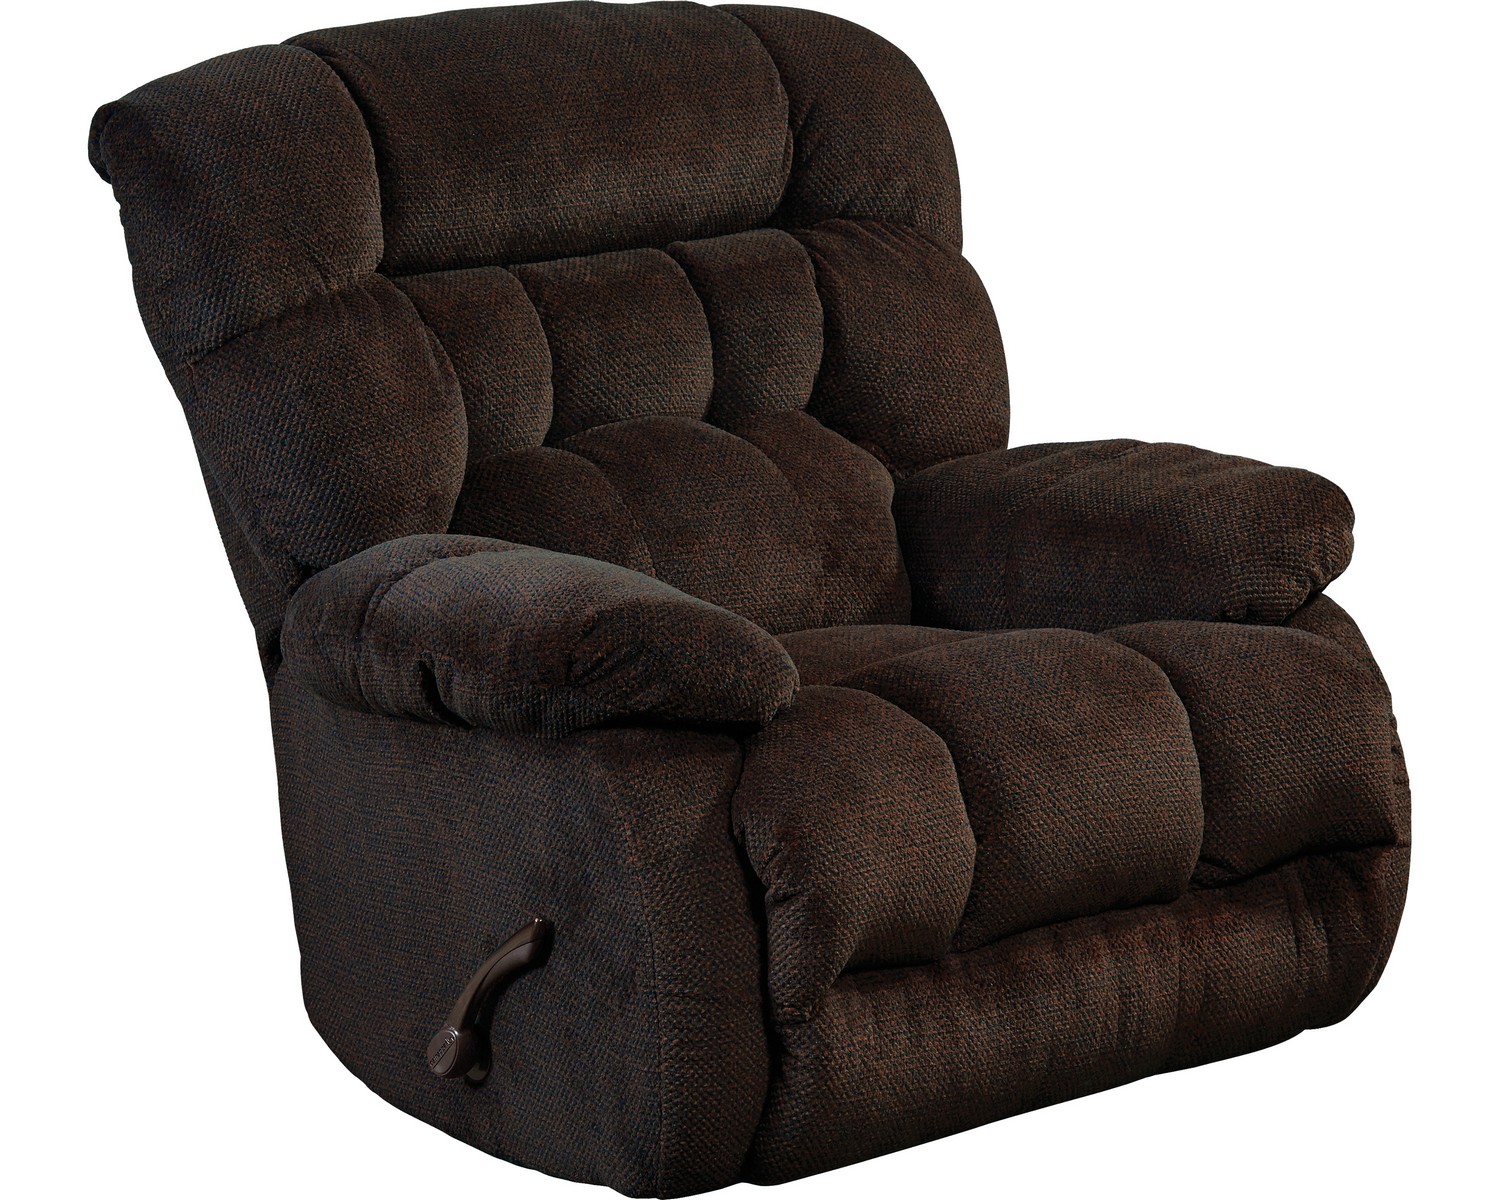 CatNapper Daly Chaise Rocker Recliner - Chocolate